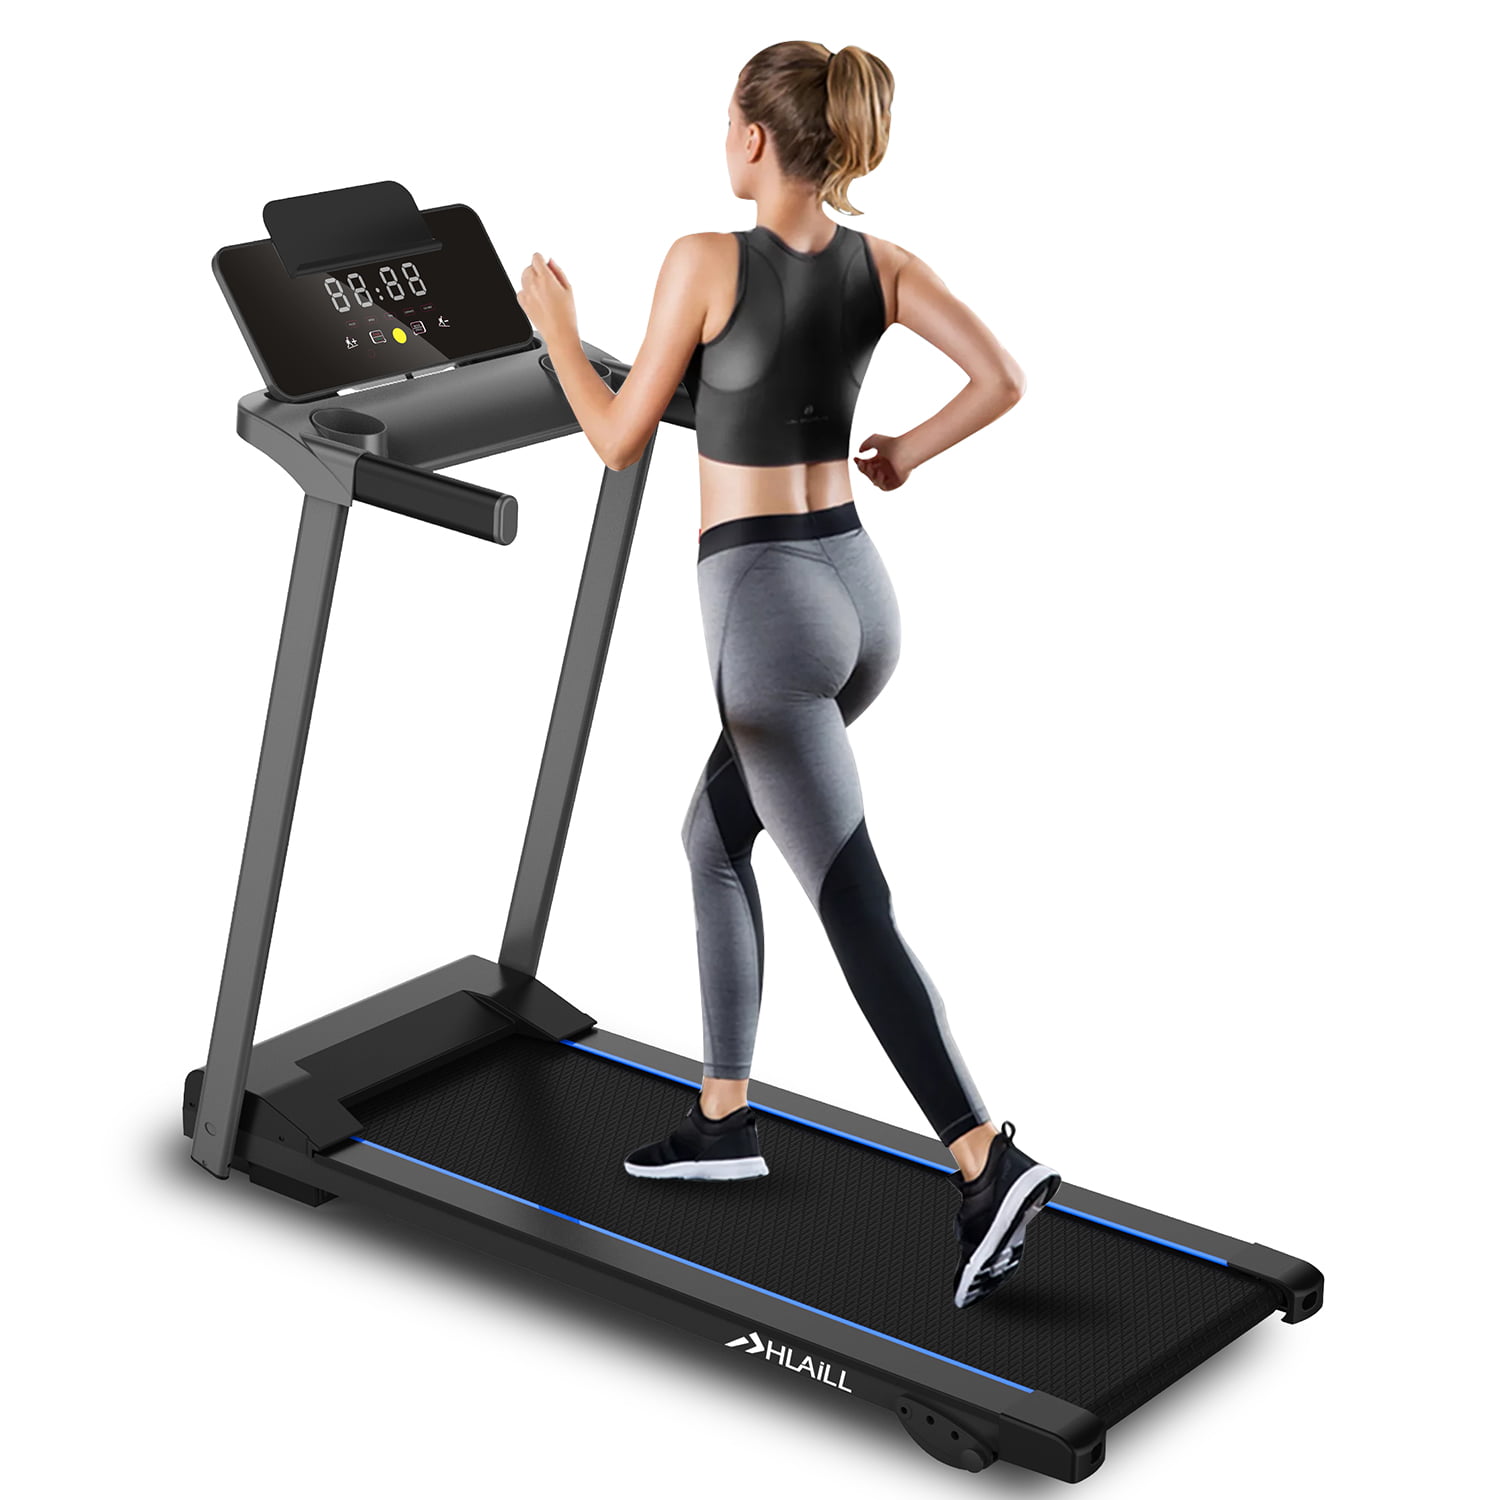 FLEXPOINT Electric Folding Treadmills for Home with Incline 2.5 HP Workout Equipment Walking Jogging Running Machine for Cardio Training with Audio Speaker 250Lbs Weight Capacity 